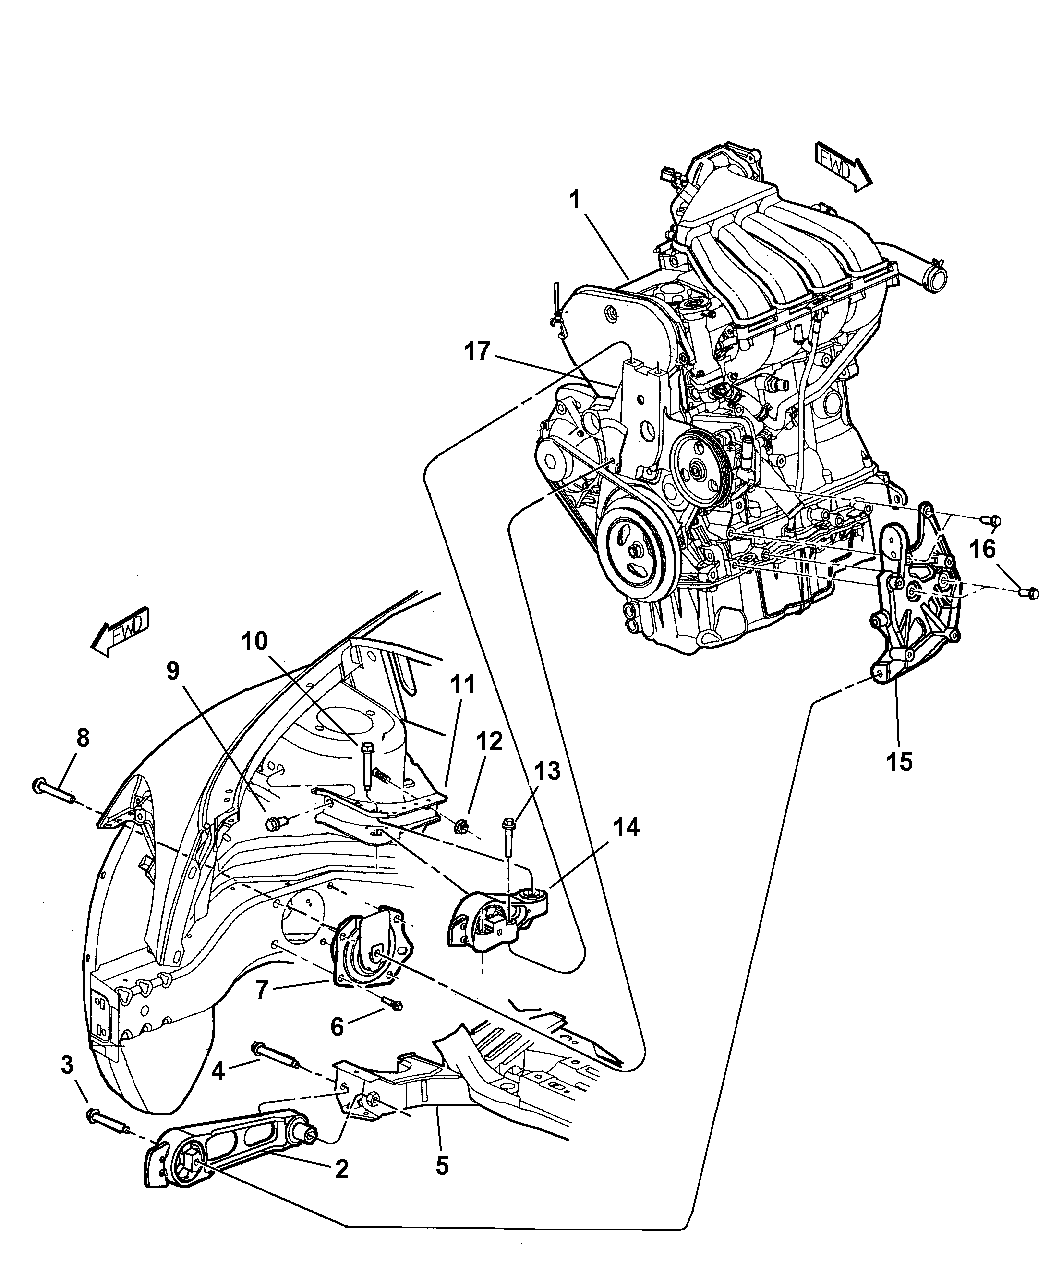 Circuit Electric For Guide: 2007 pt cruiser engine diagram